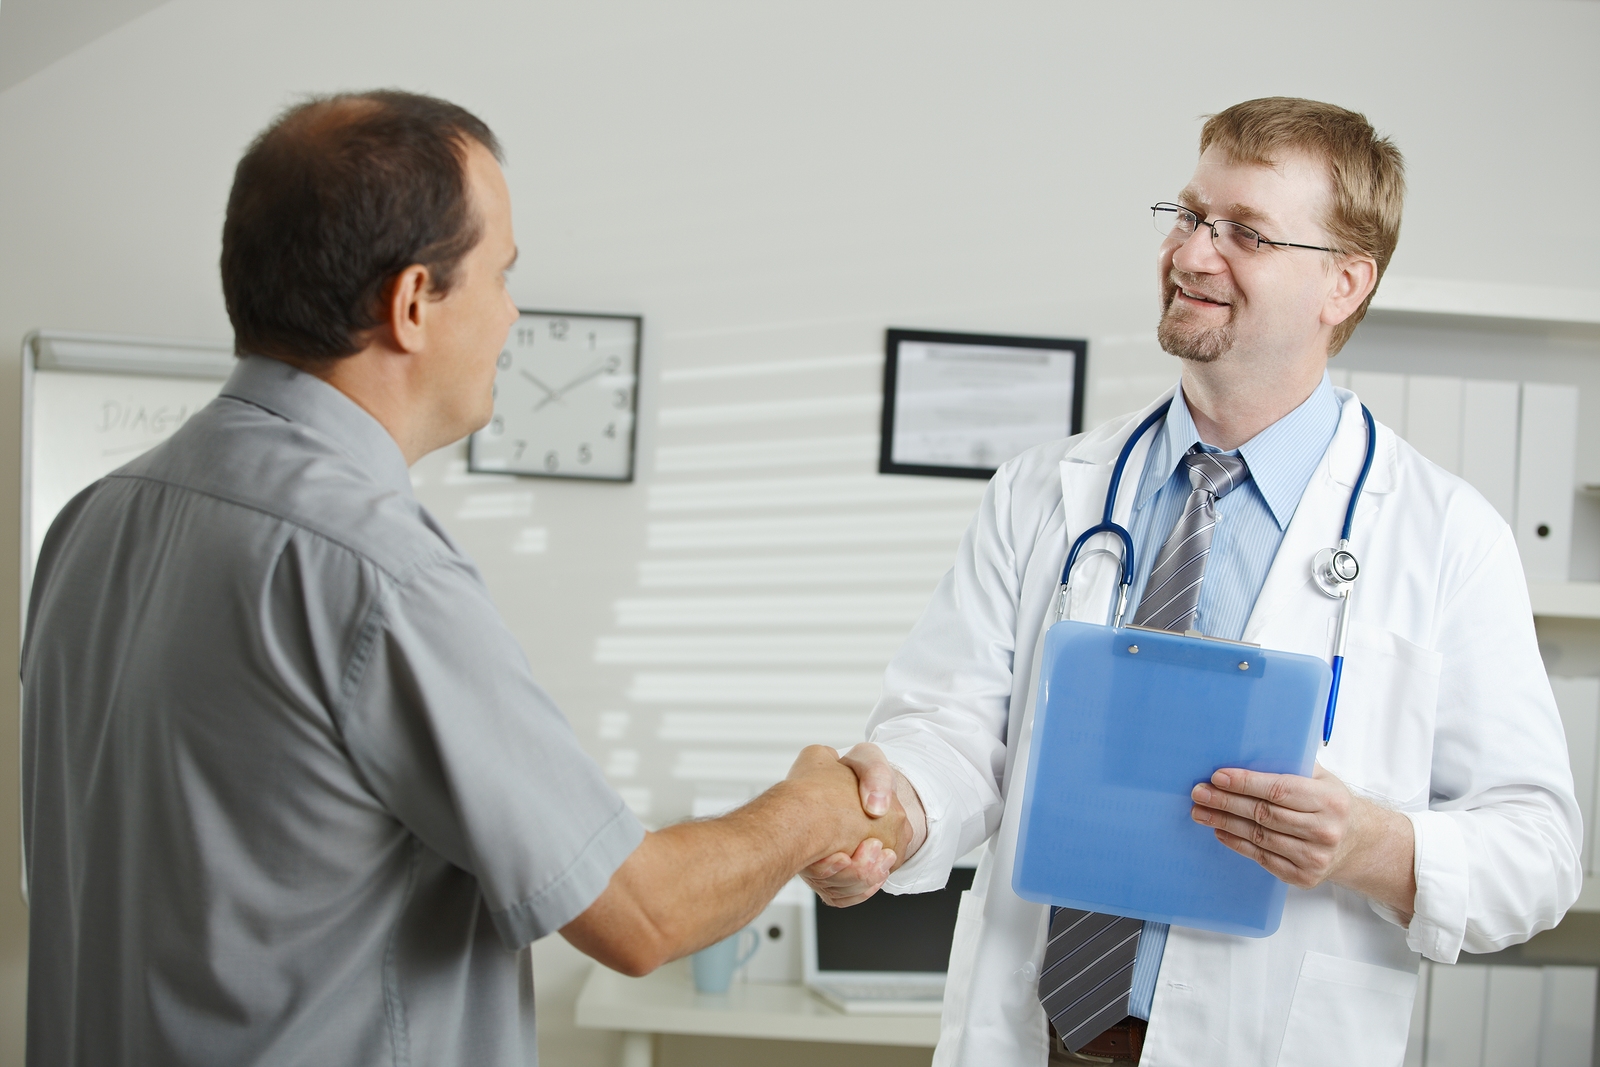 Medical office - middle-aged male doctor greeting patient, shaking hands.